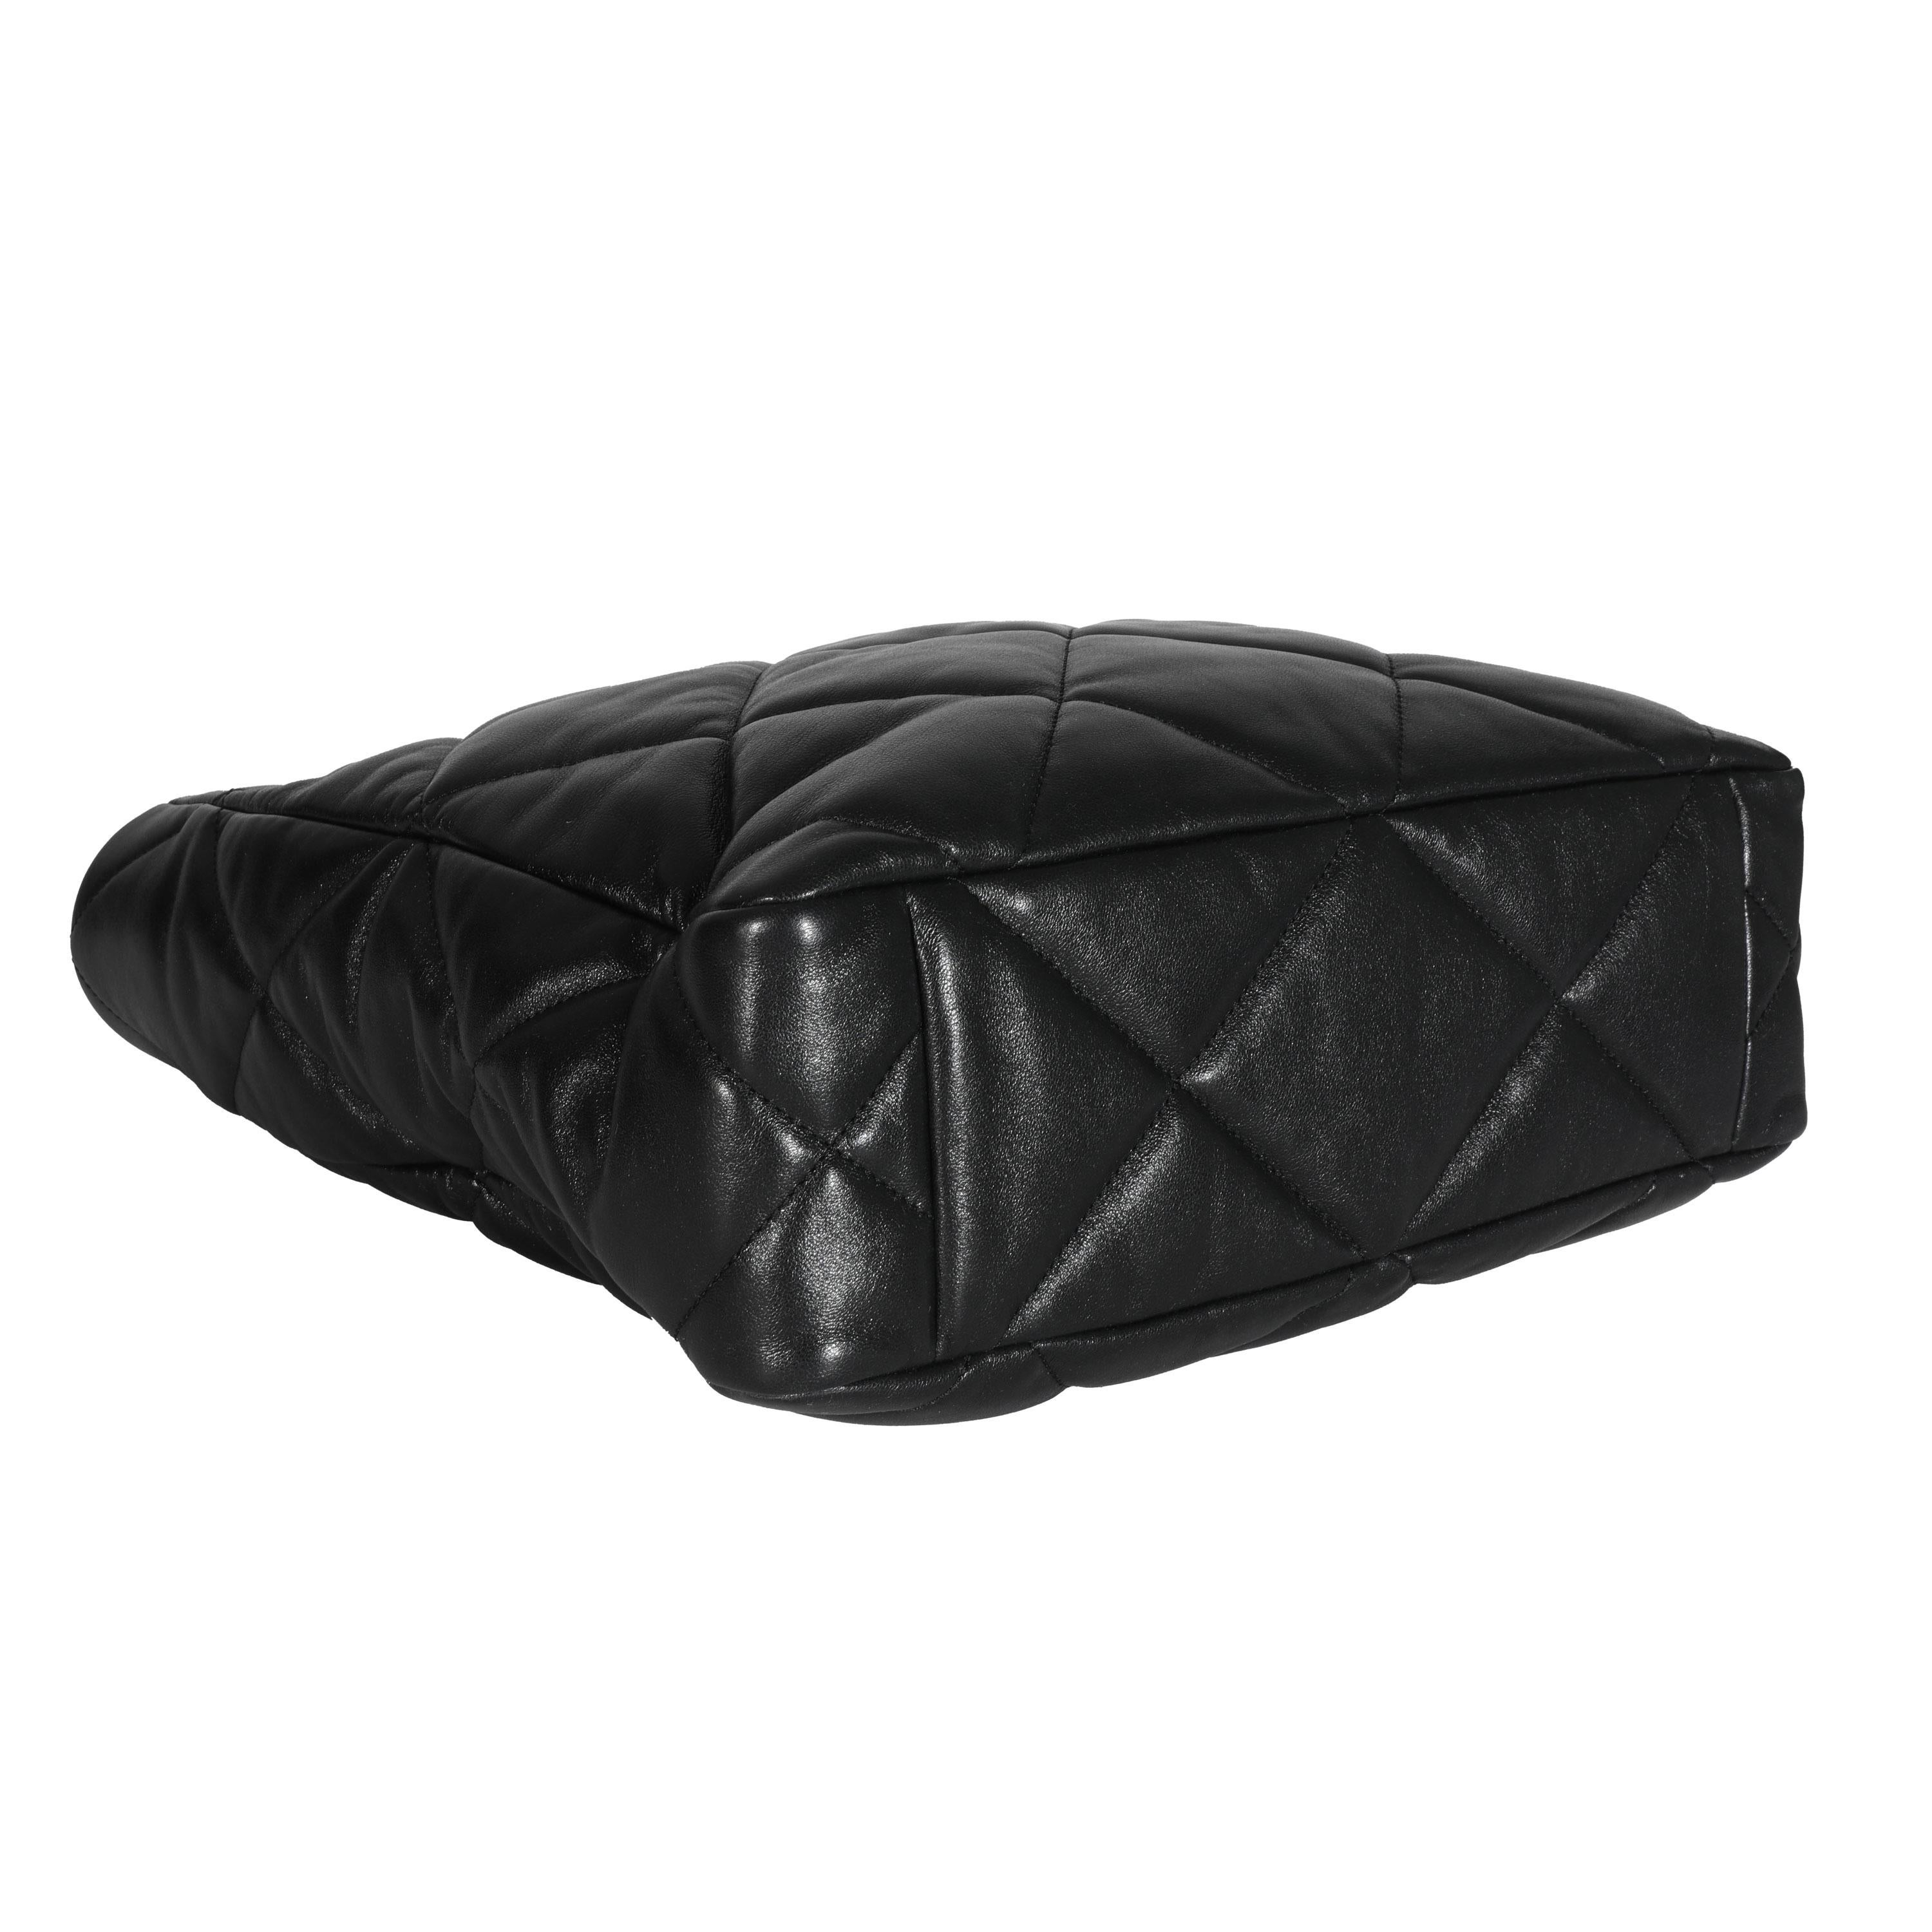 Listing Title: Chanel Black Lambskin Quilted Chanel 19 Shopping Bag
SKU: 131562
MSRP: 6500.00
Condition: Pre-owned 
Handbag Condition: Excellent
Condition Comments: Item is in excellent condition and displays light signs of wear. Plastic along